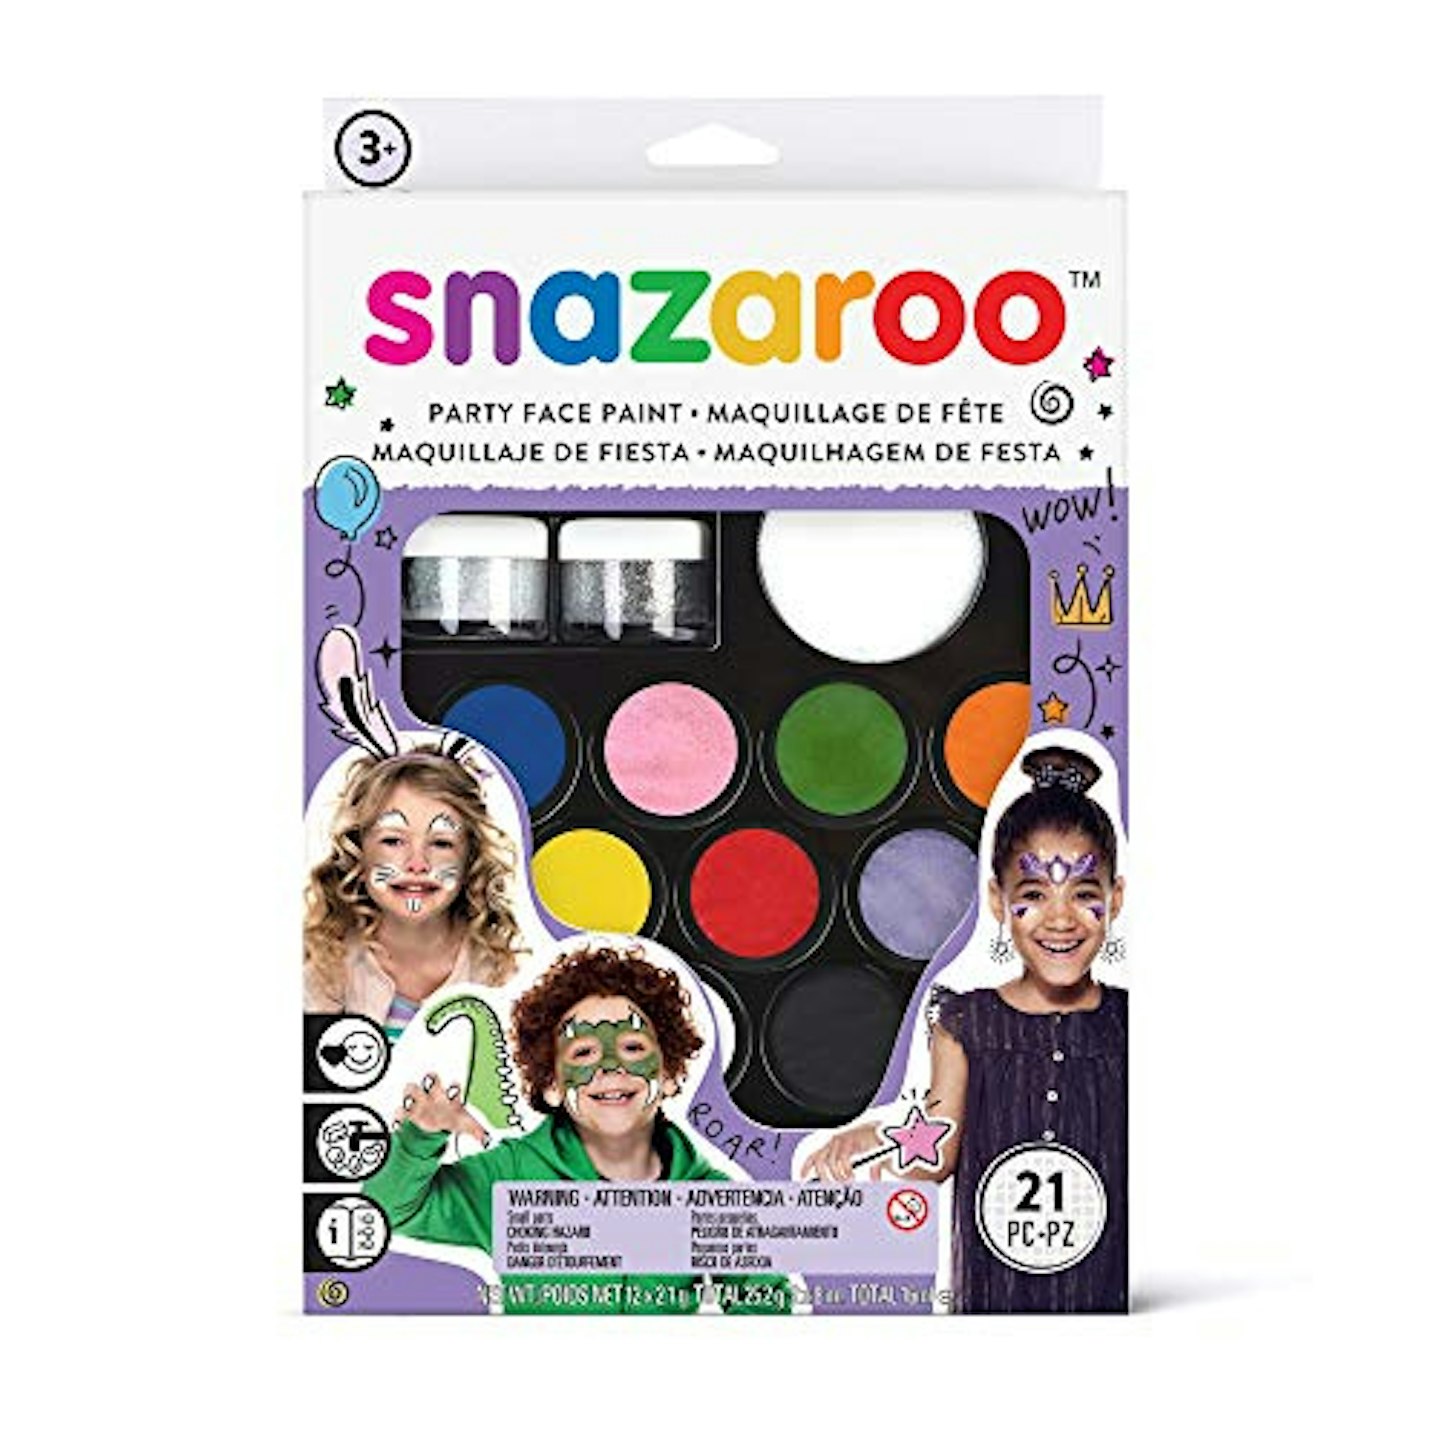 Snazaroo Ultimate Party Pack,